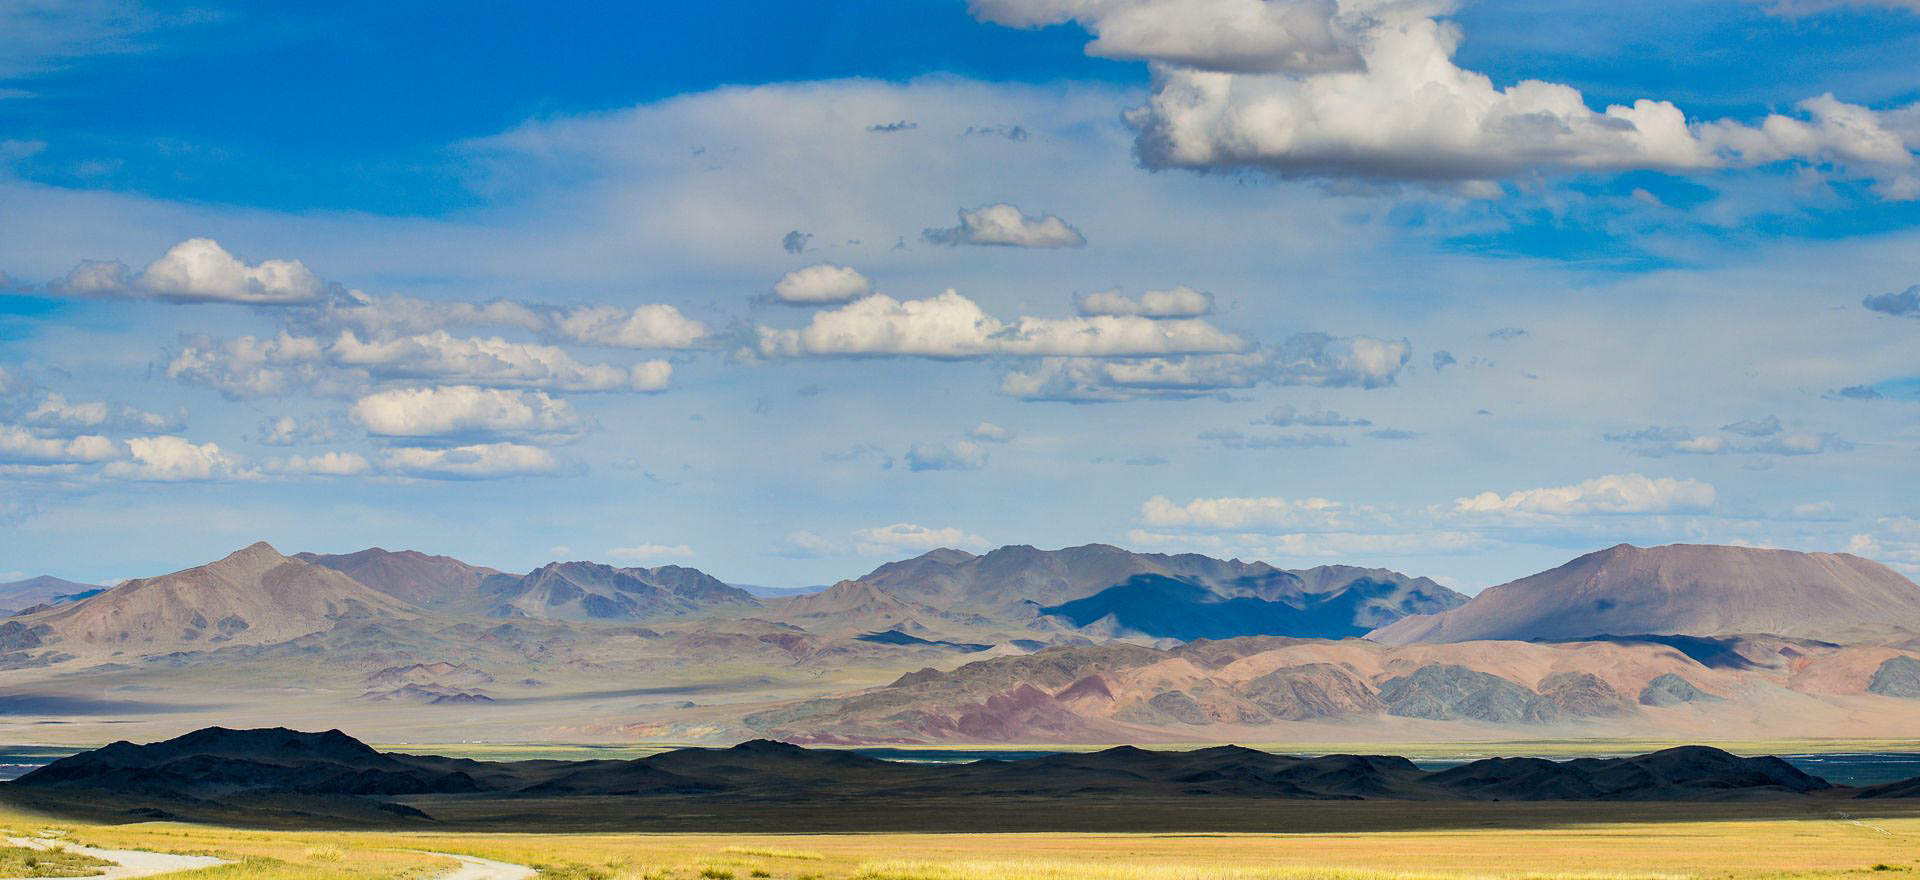 Mongolia Holidays and Tours - rolling steppe and low mountains